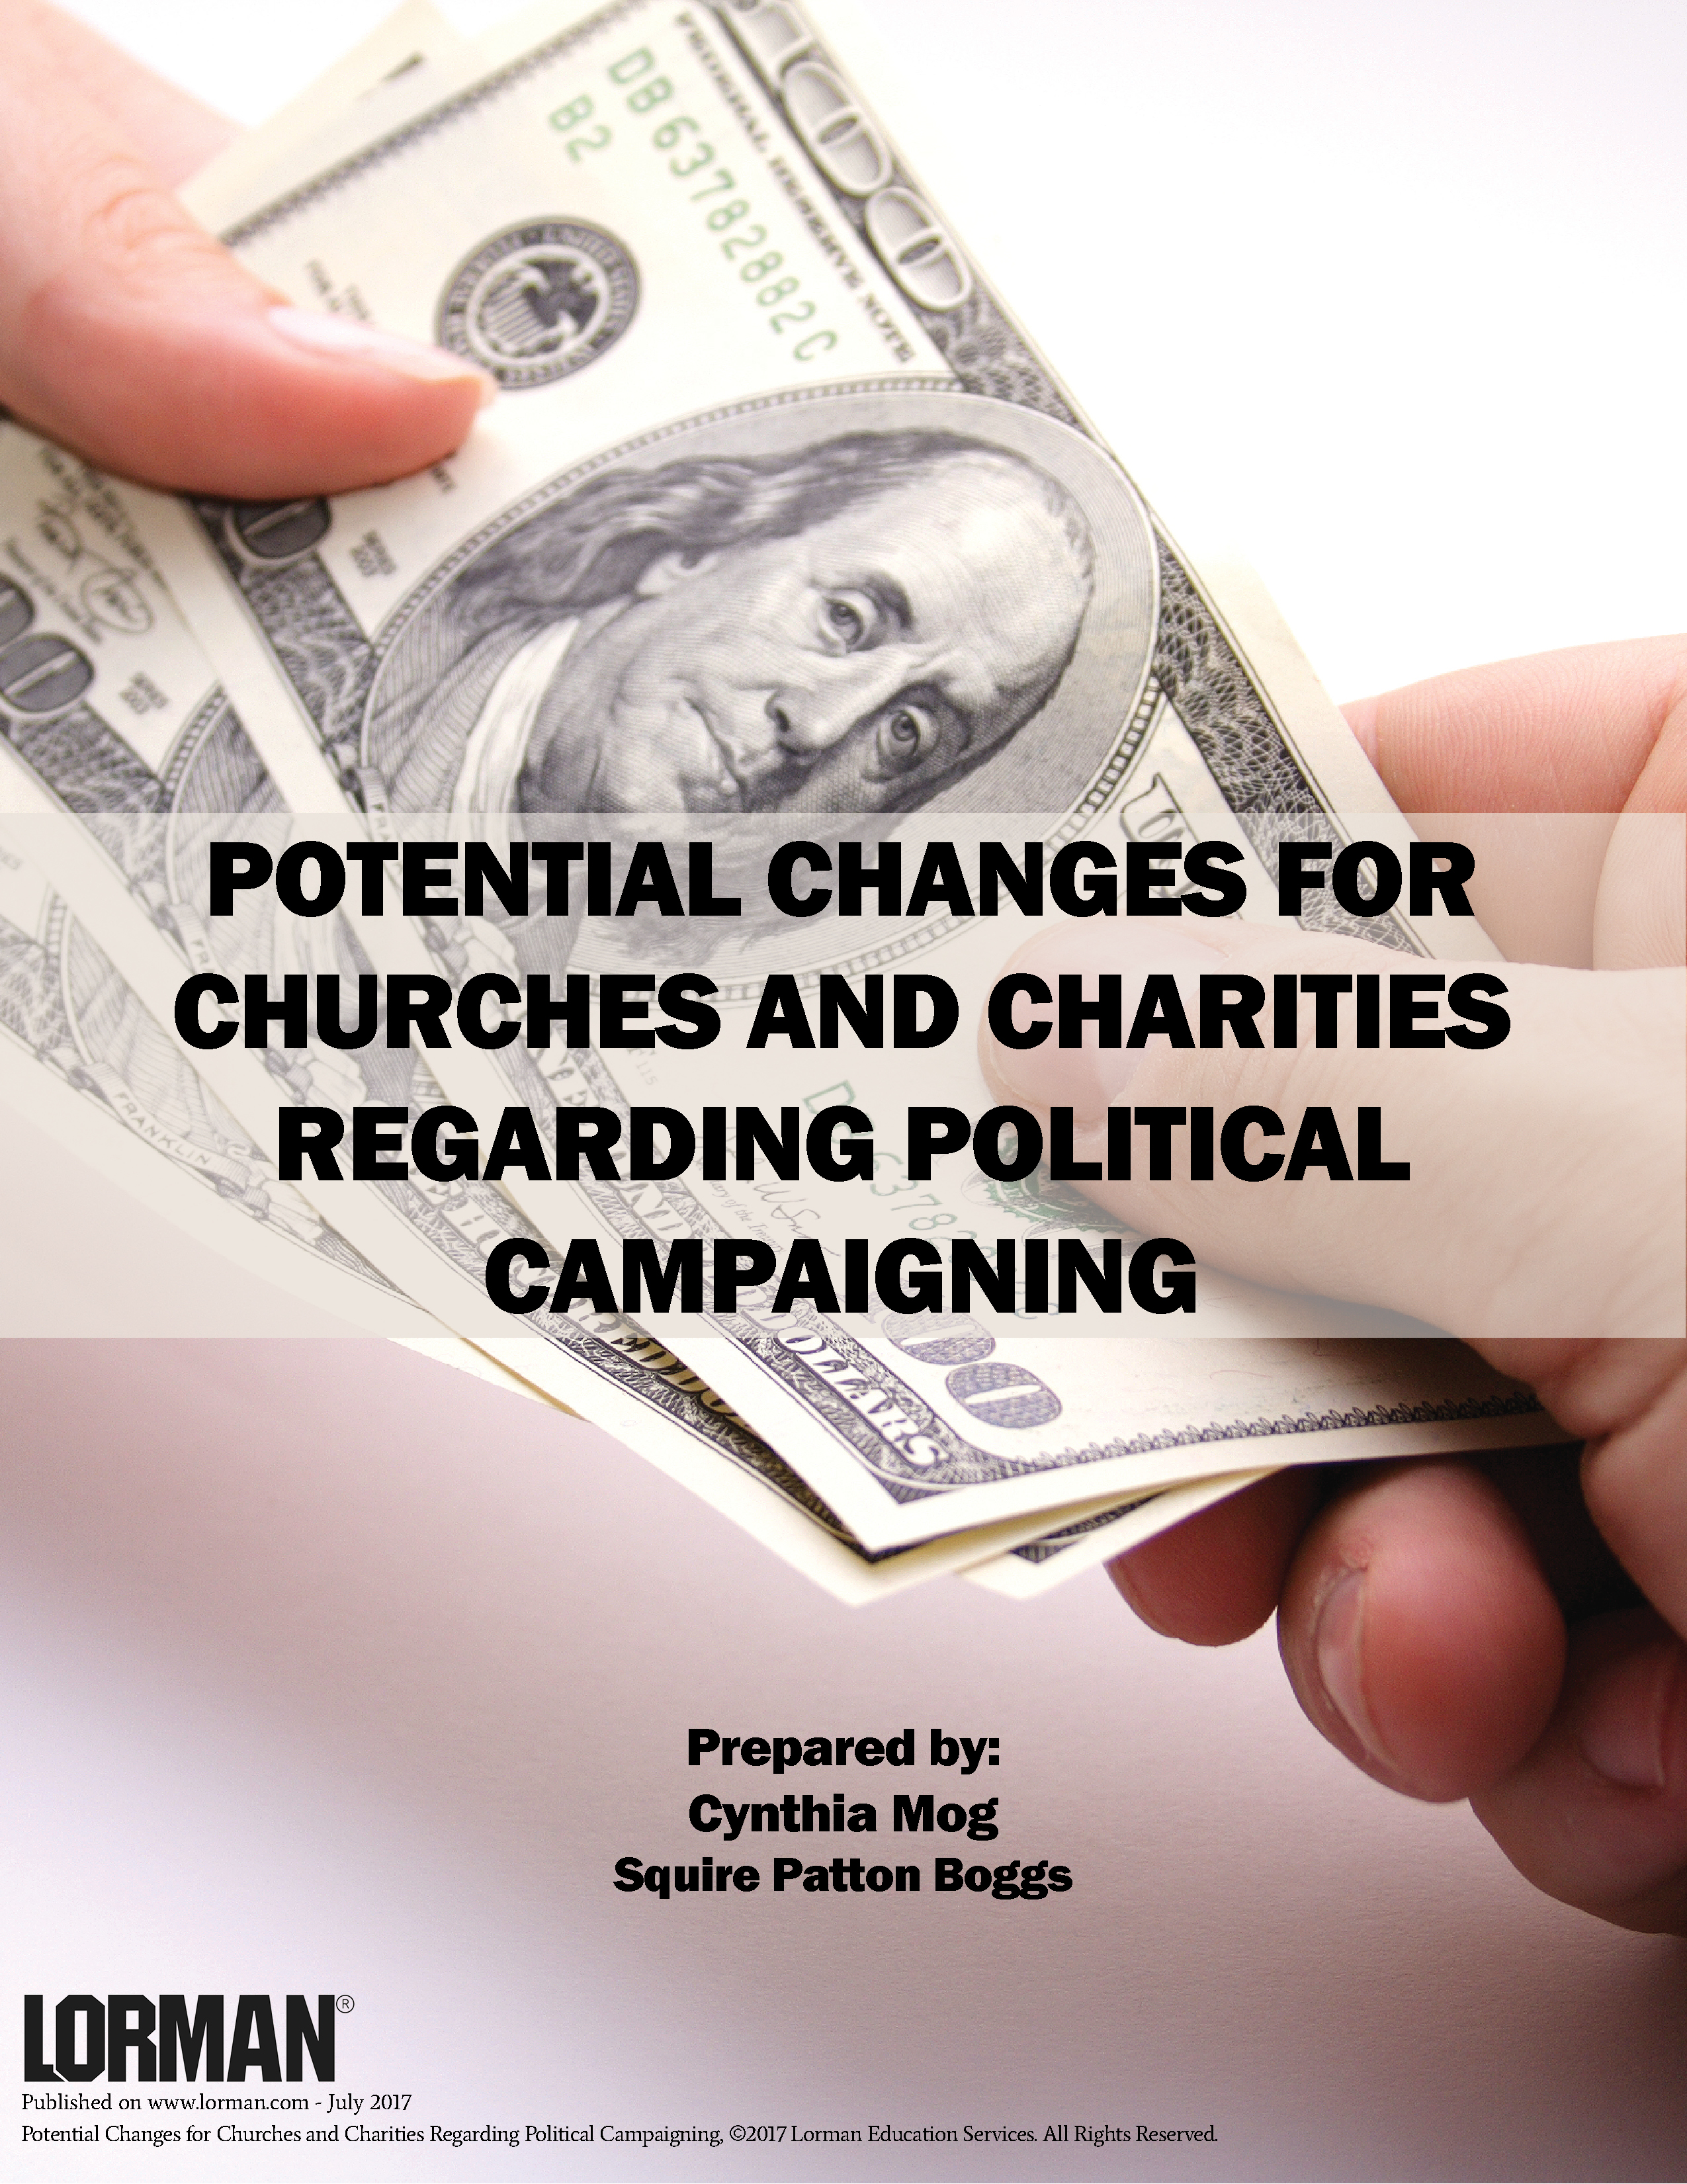 Potential Changes for Churches and Charities Regarding Political Campaigning